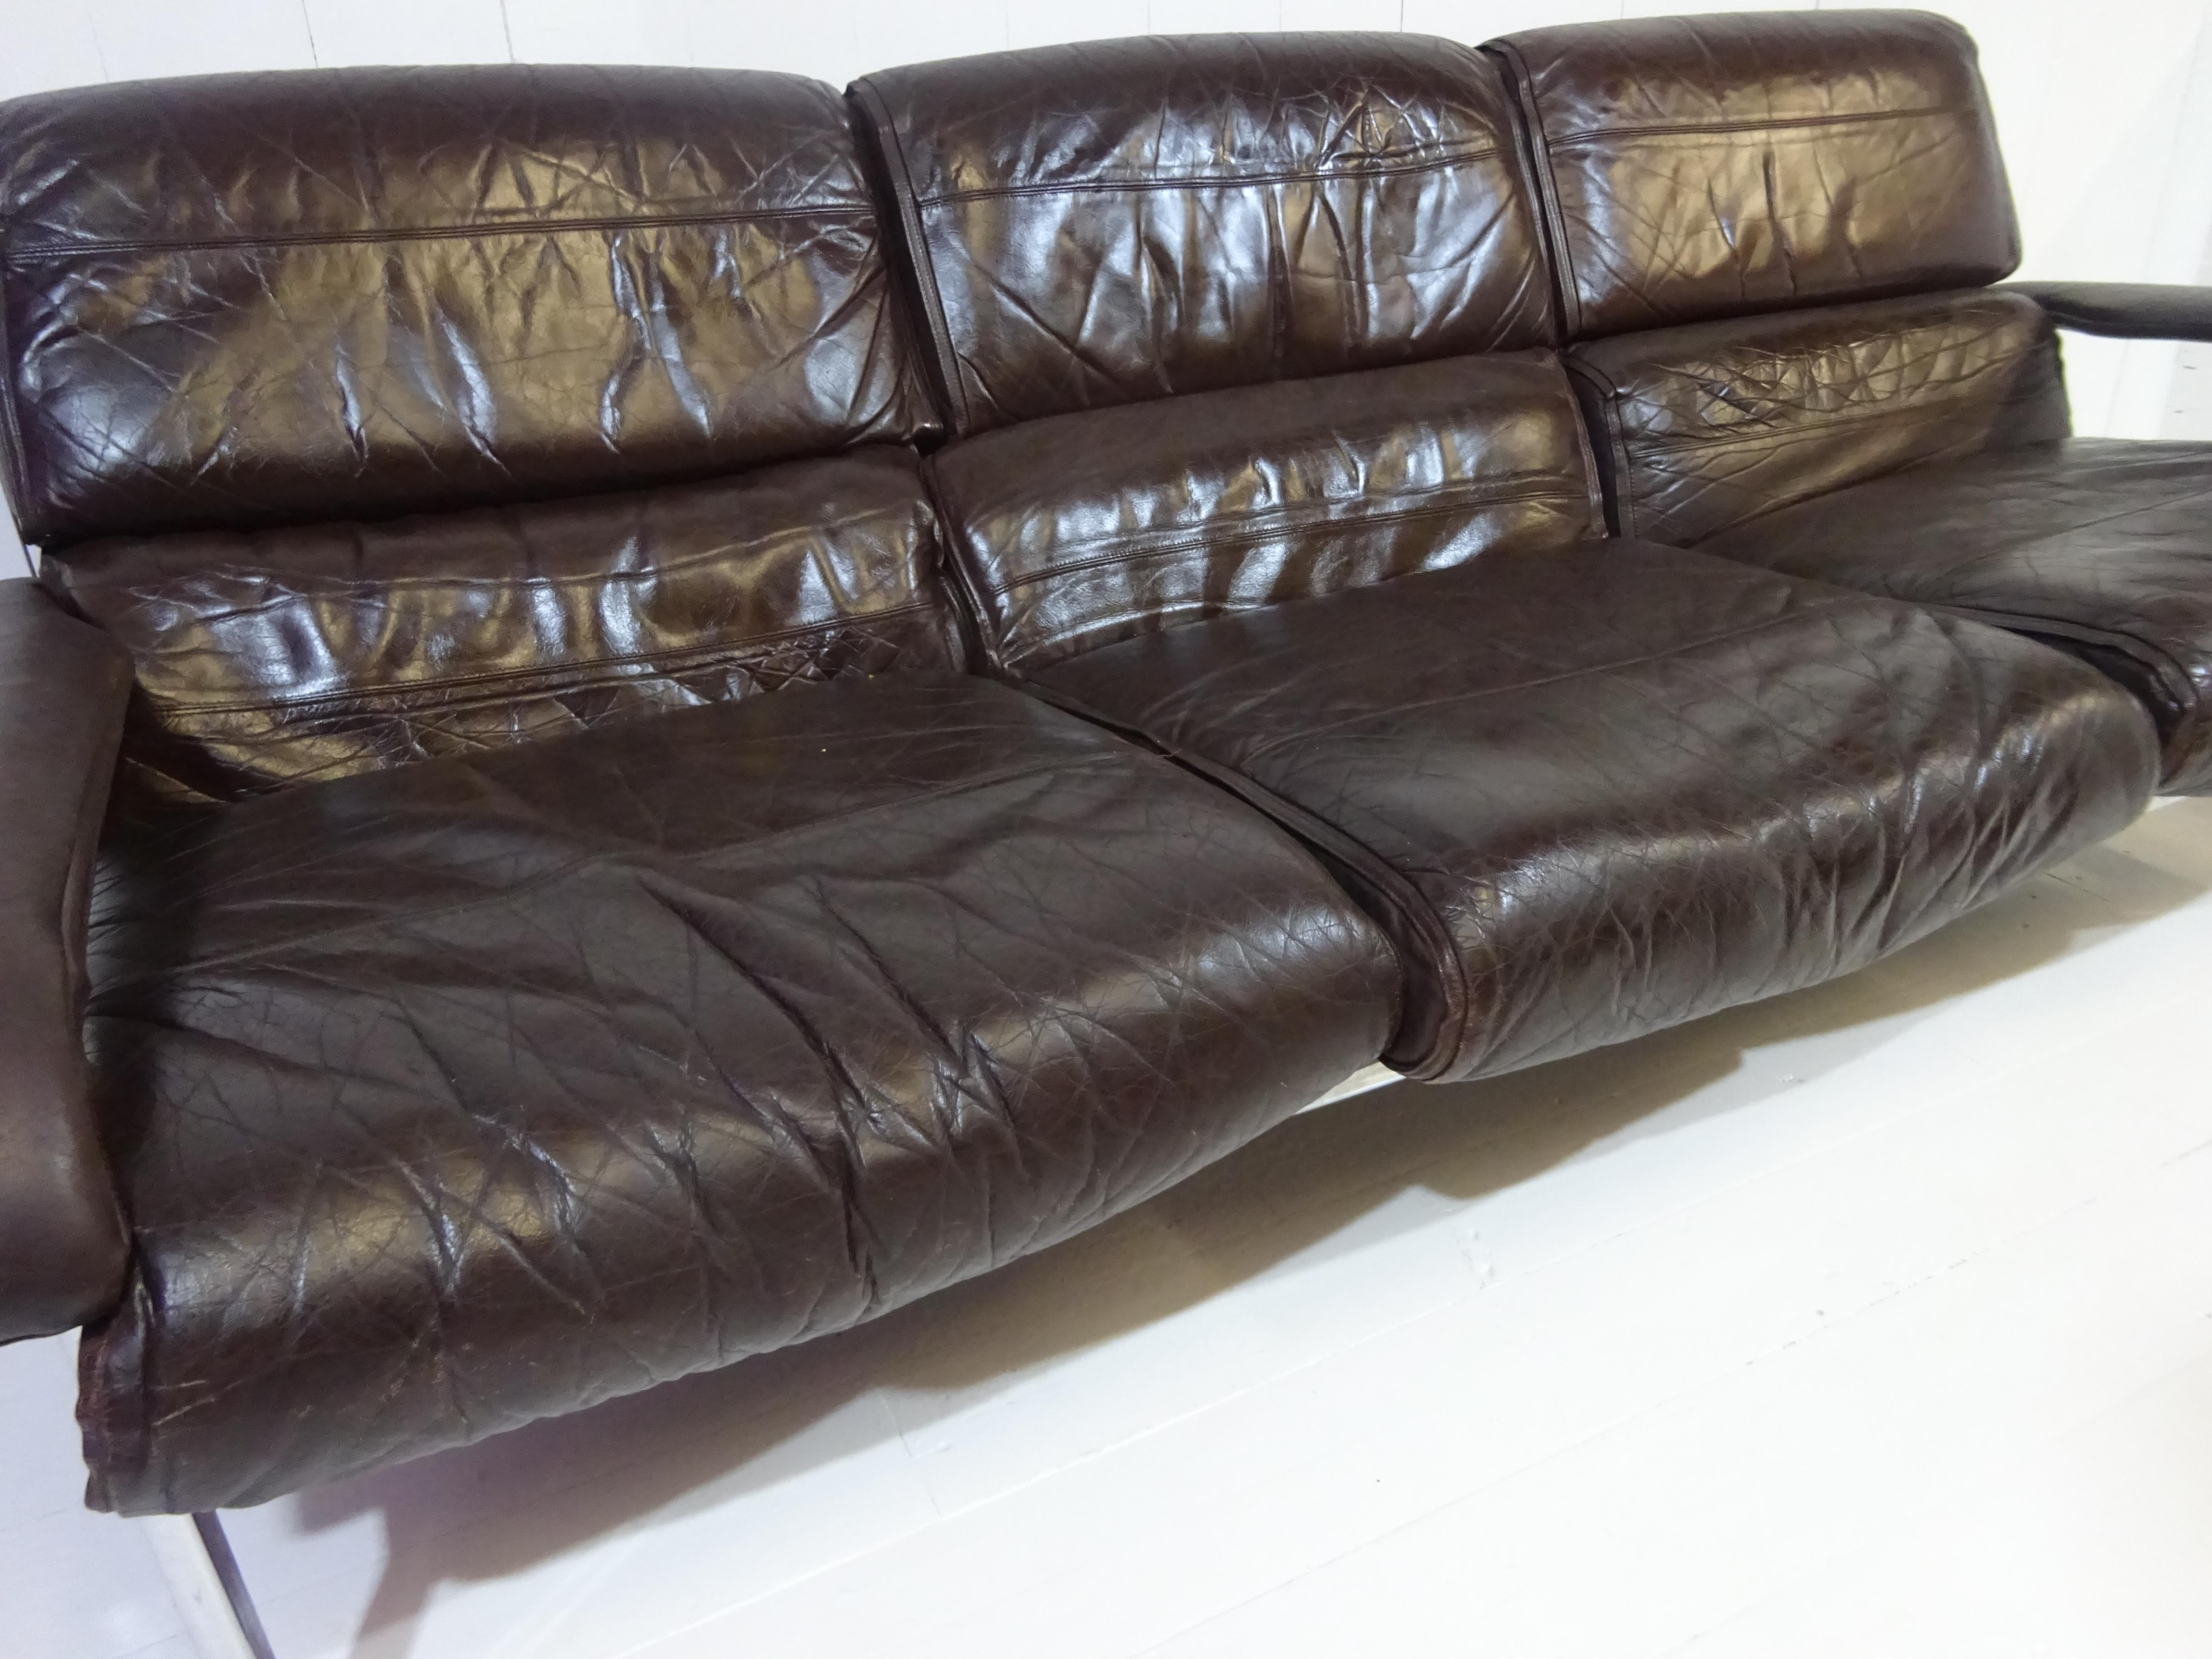 Metalwork Mid Century Three Seater Sofa in Distressed Brown Leather by Pieff